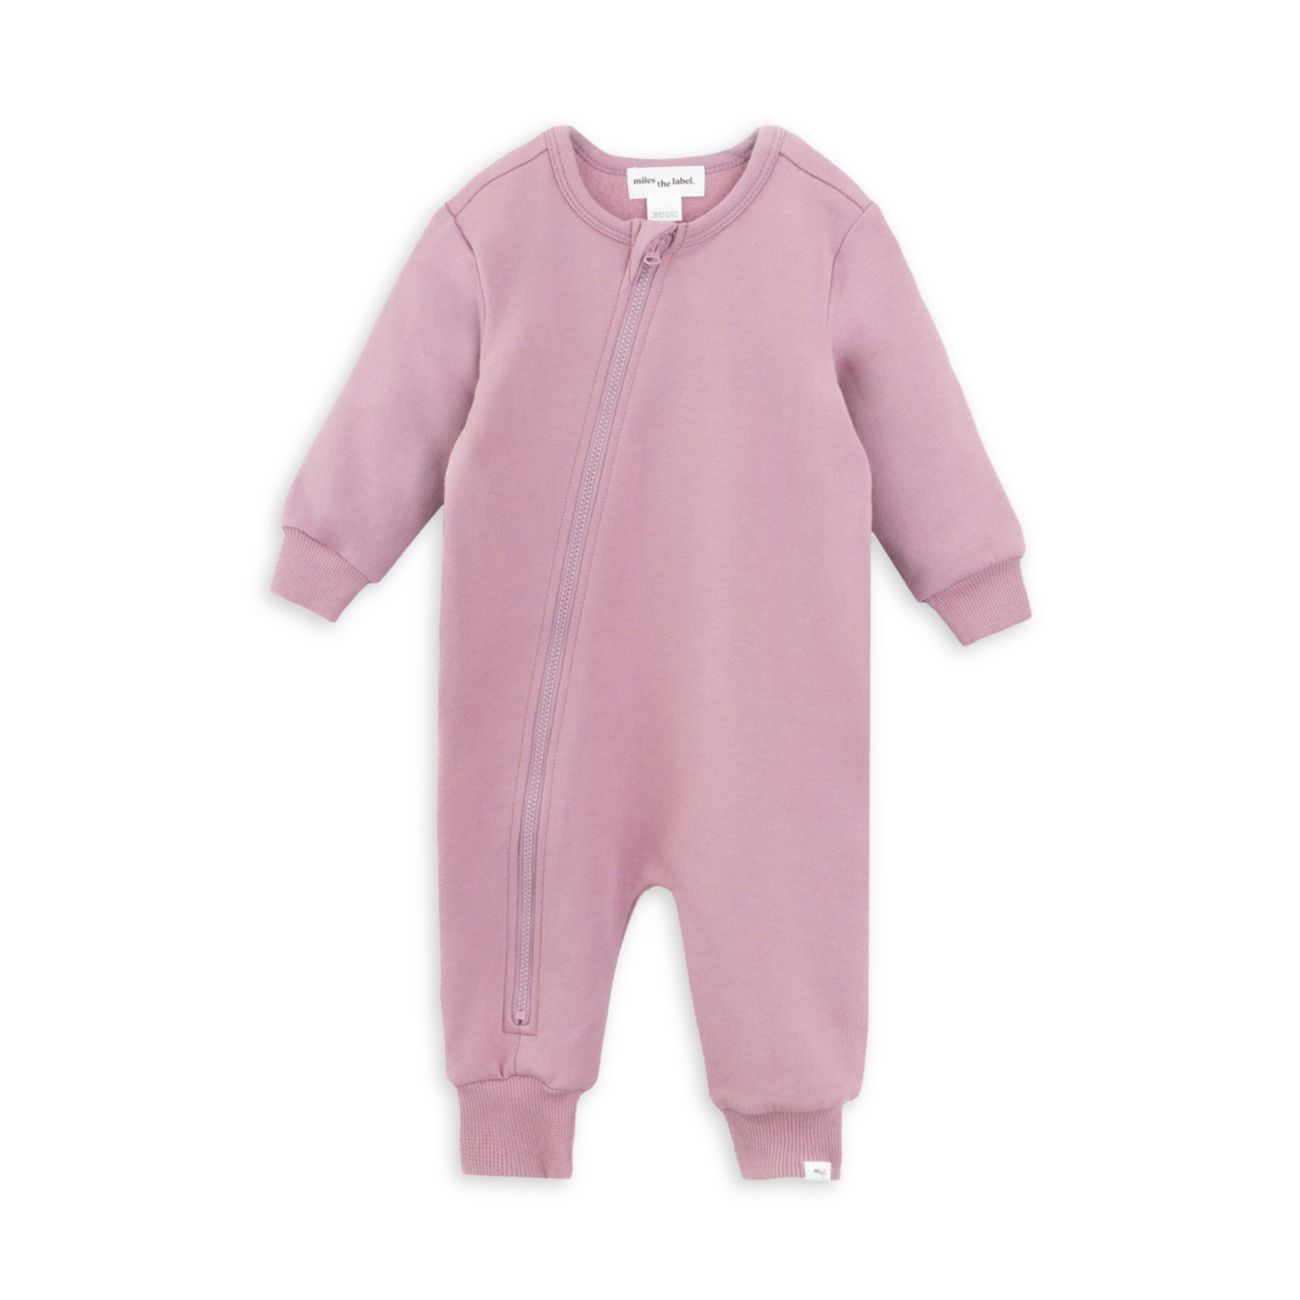 Baby's Cotton-Blend Coverall Miles the Label